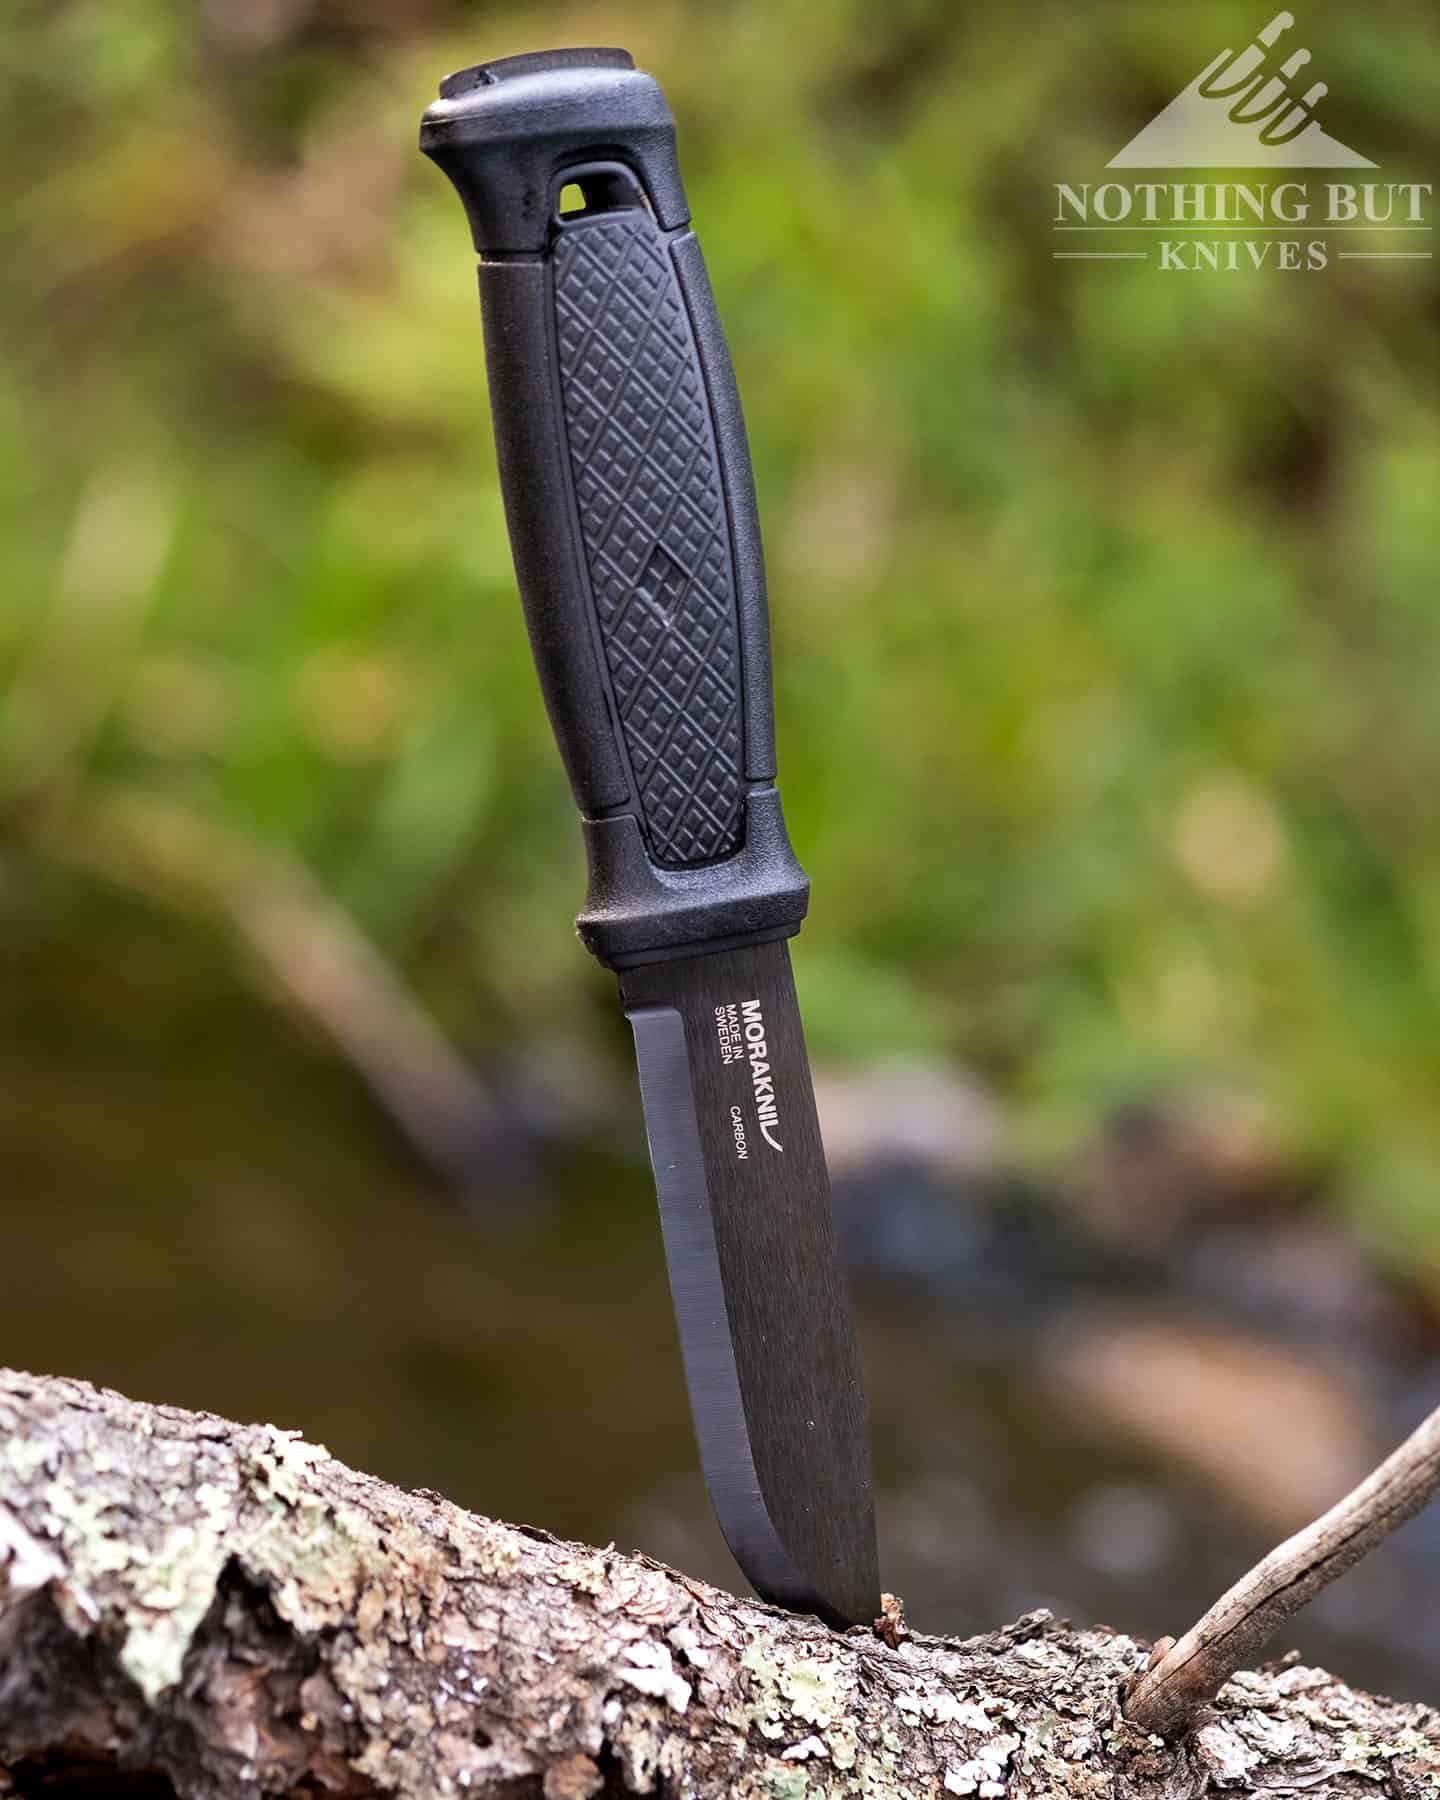 The Morakniv Garburg full tang knife has established itself at one of the best all-around bushcraft knives on the market.